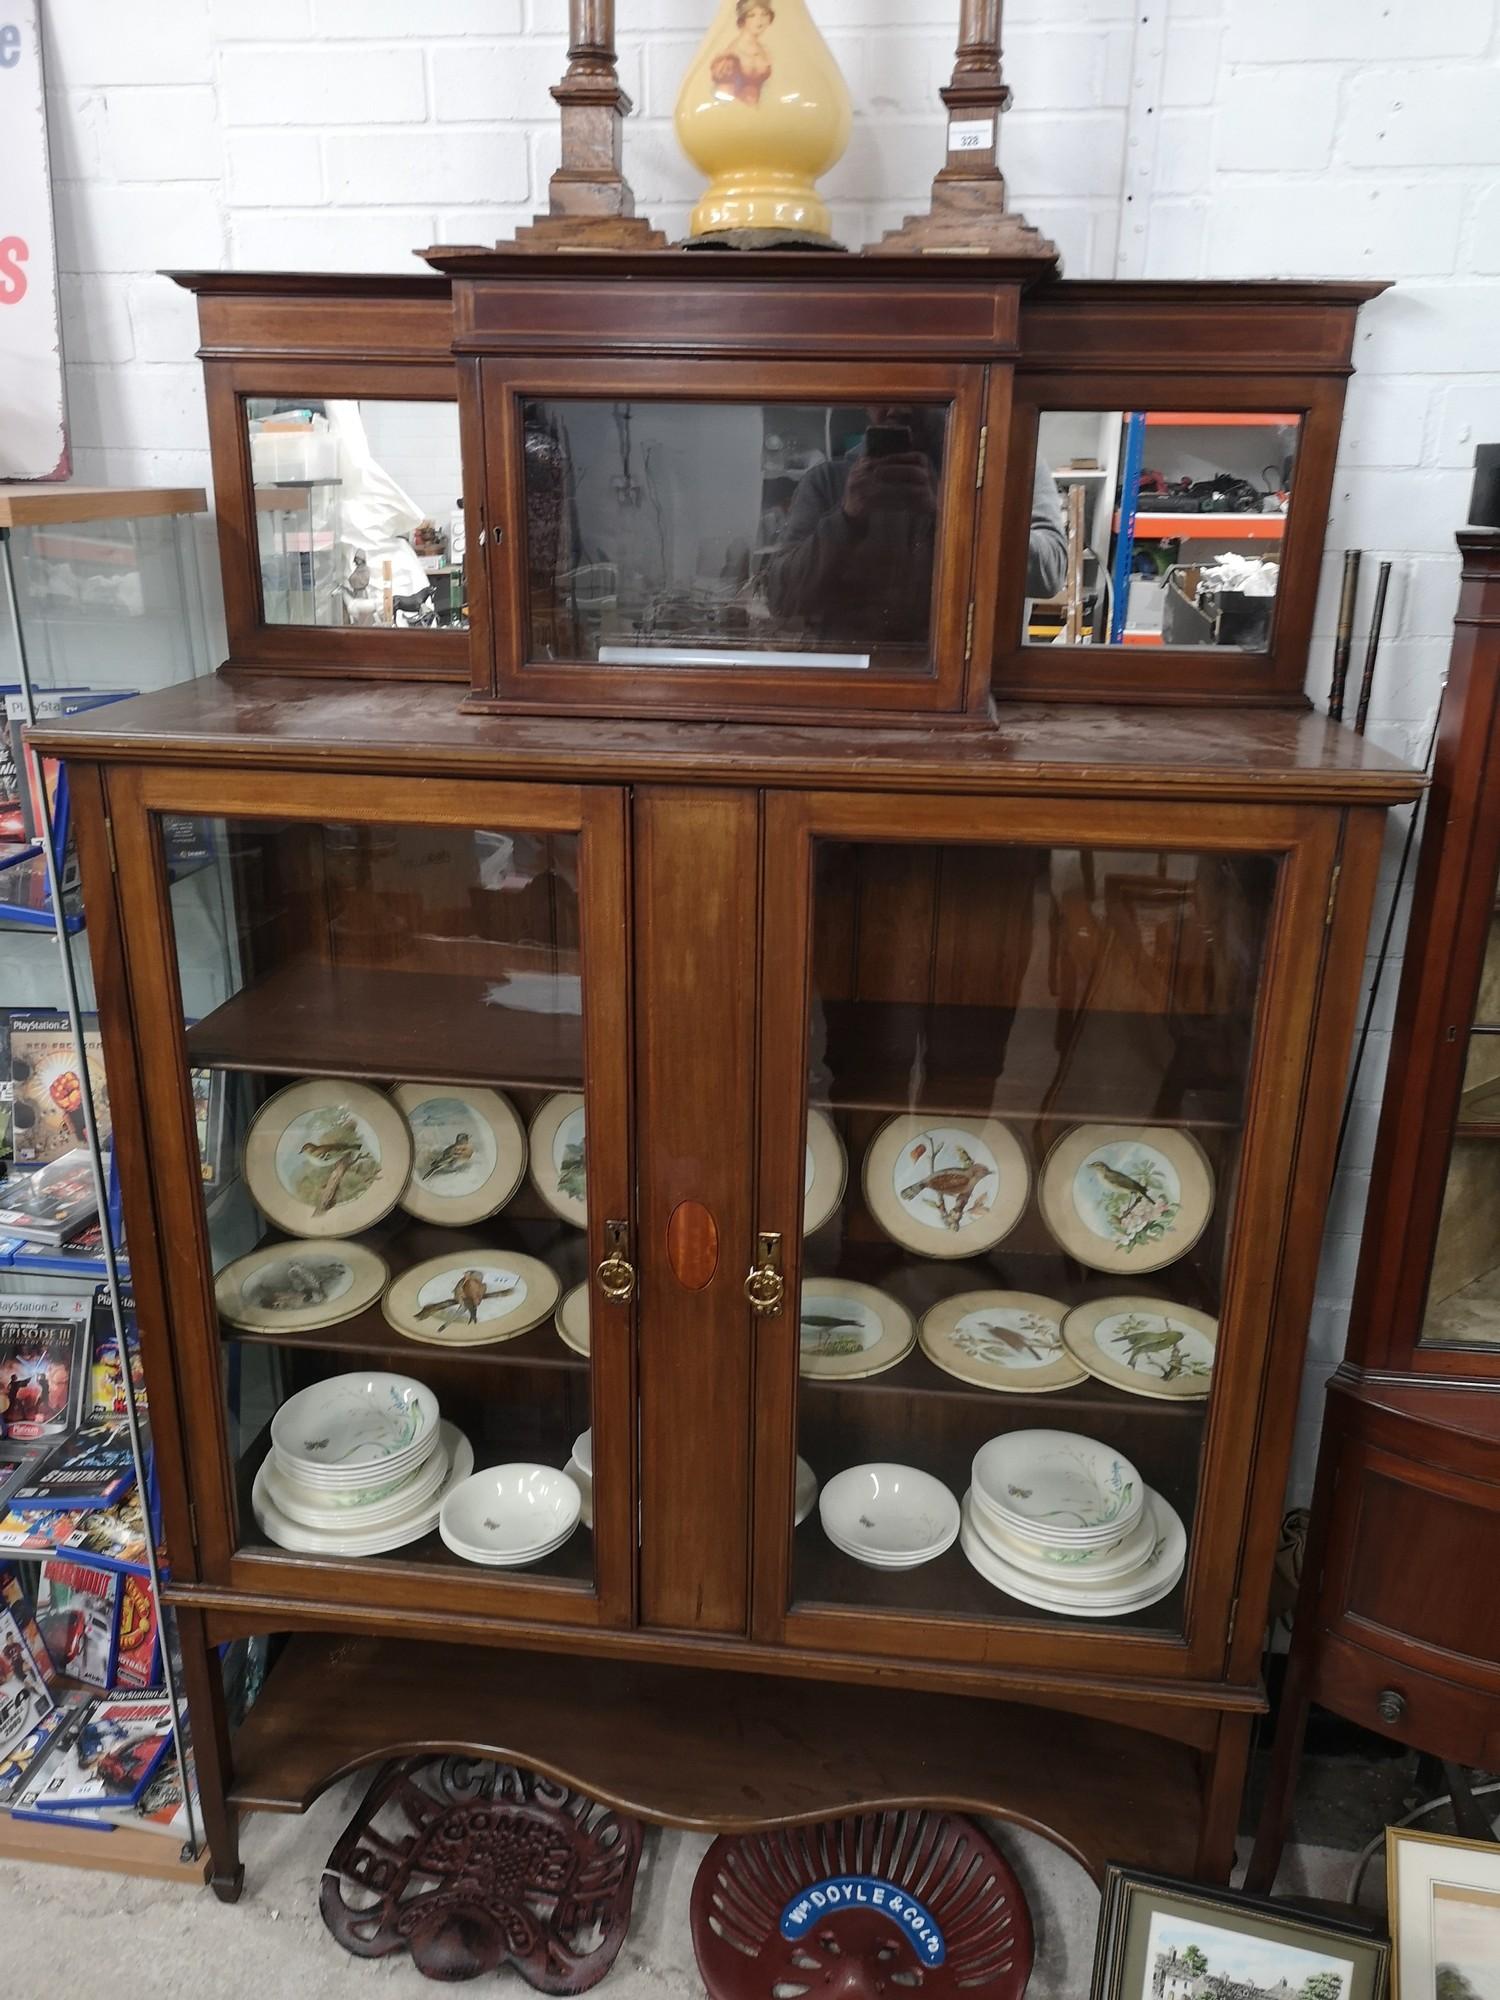 Large Edwardian inlaid dresser with 2 glass fronted doors with mirror back.